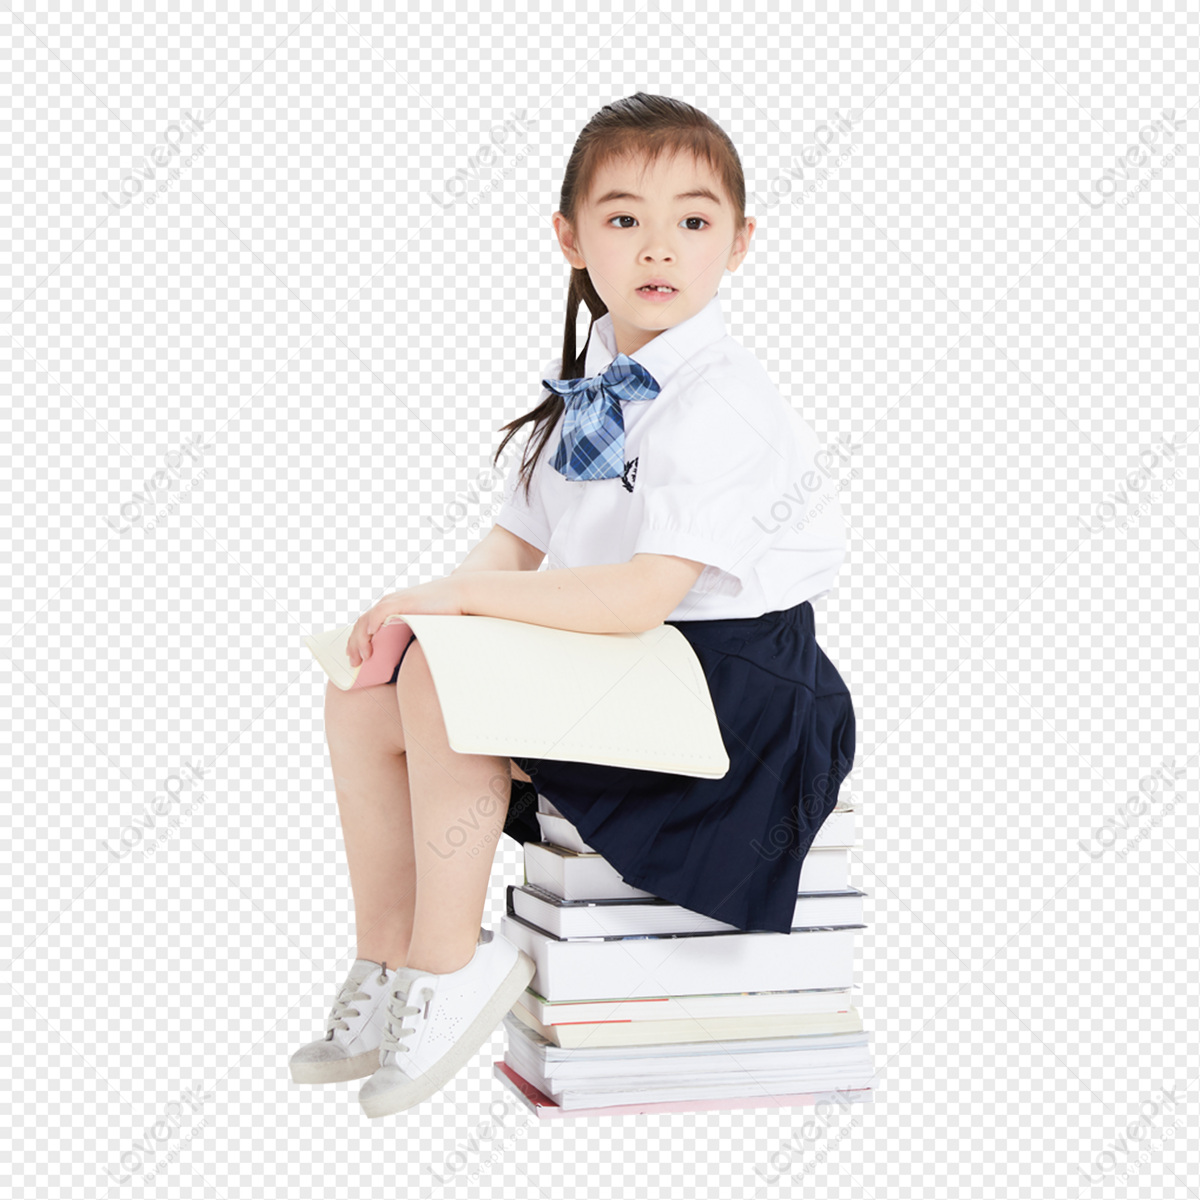 Primary School Student PNG Image And Clipart Image For Free Download -  Lovepik | 401258768